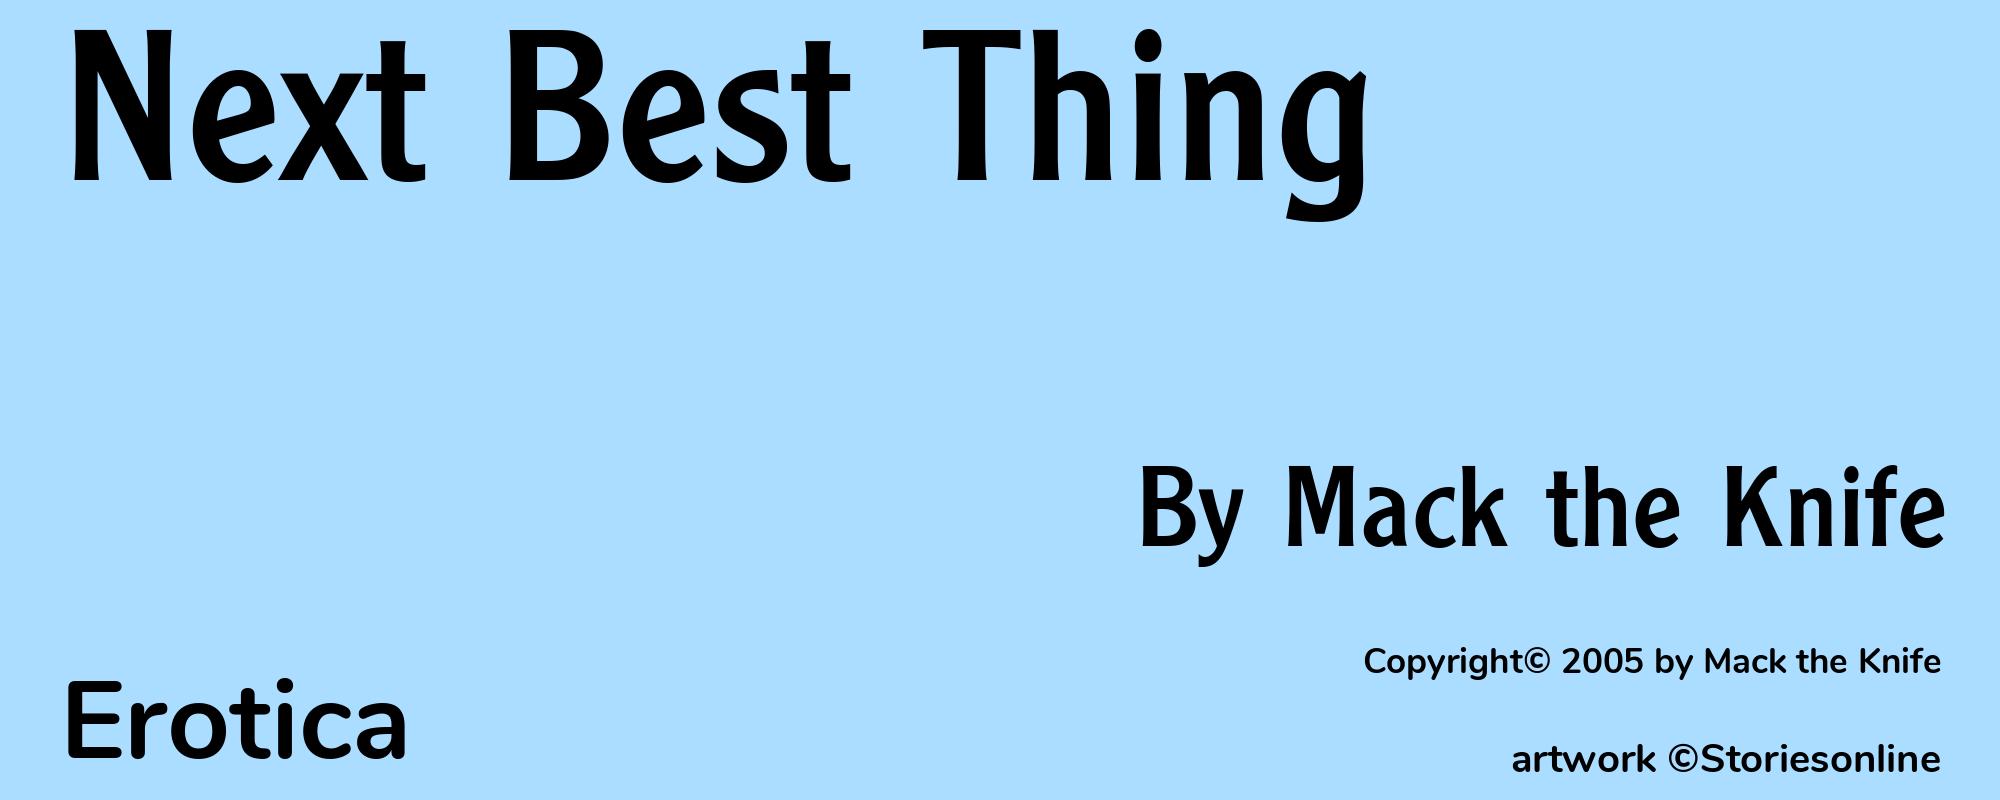 Next Best Thing - Cover